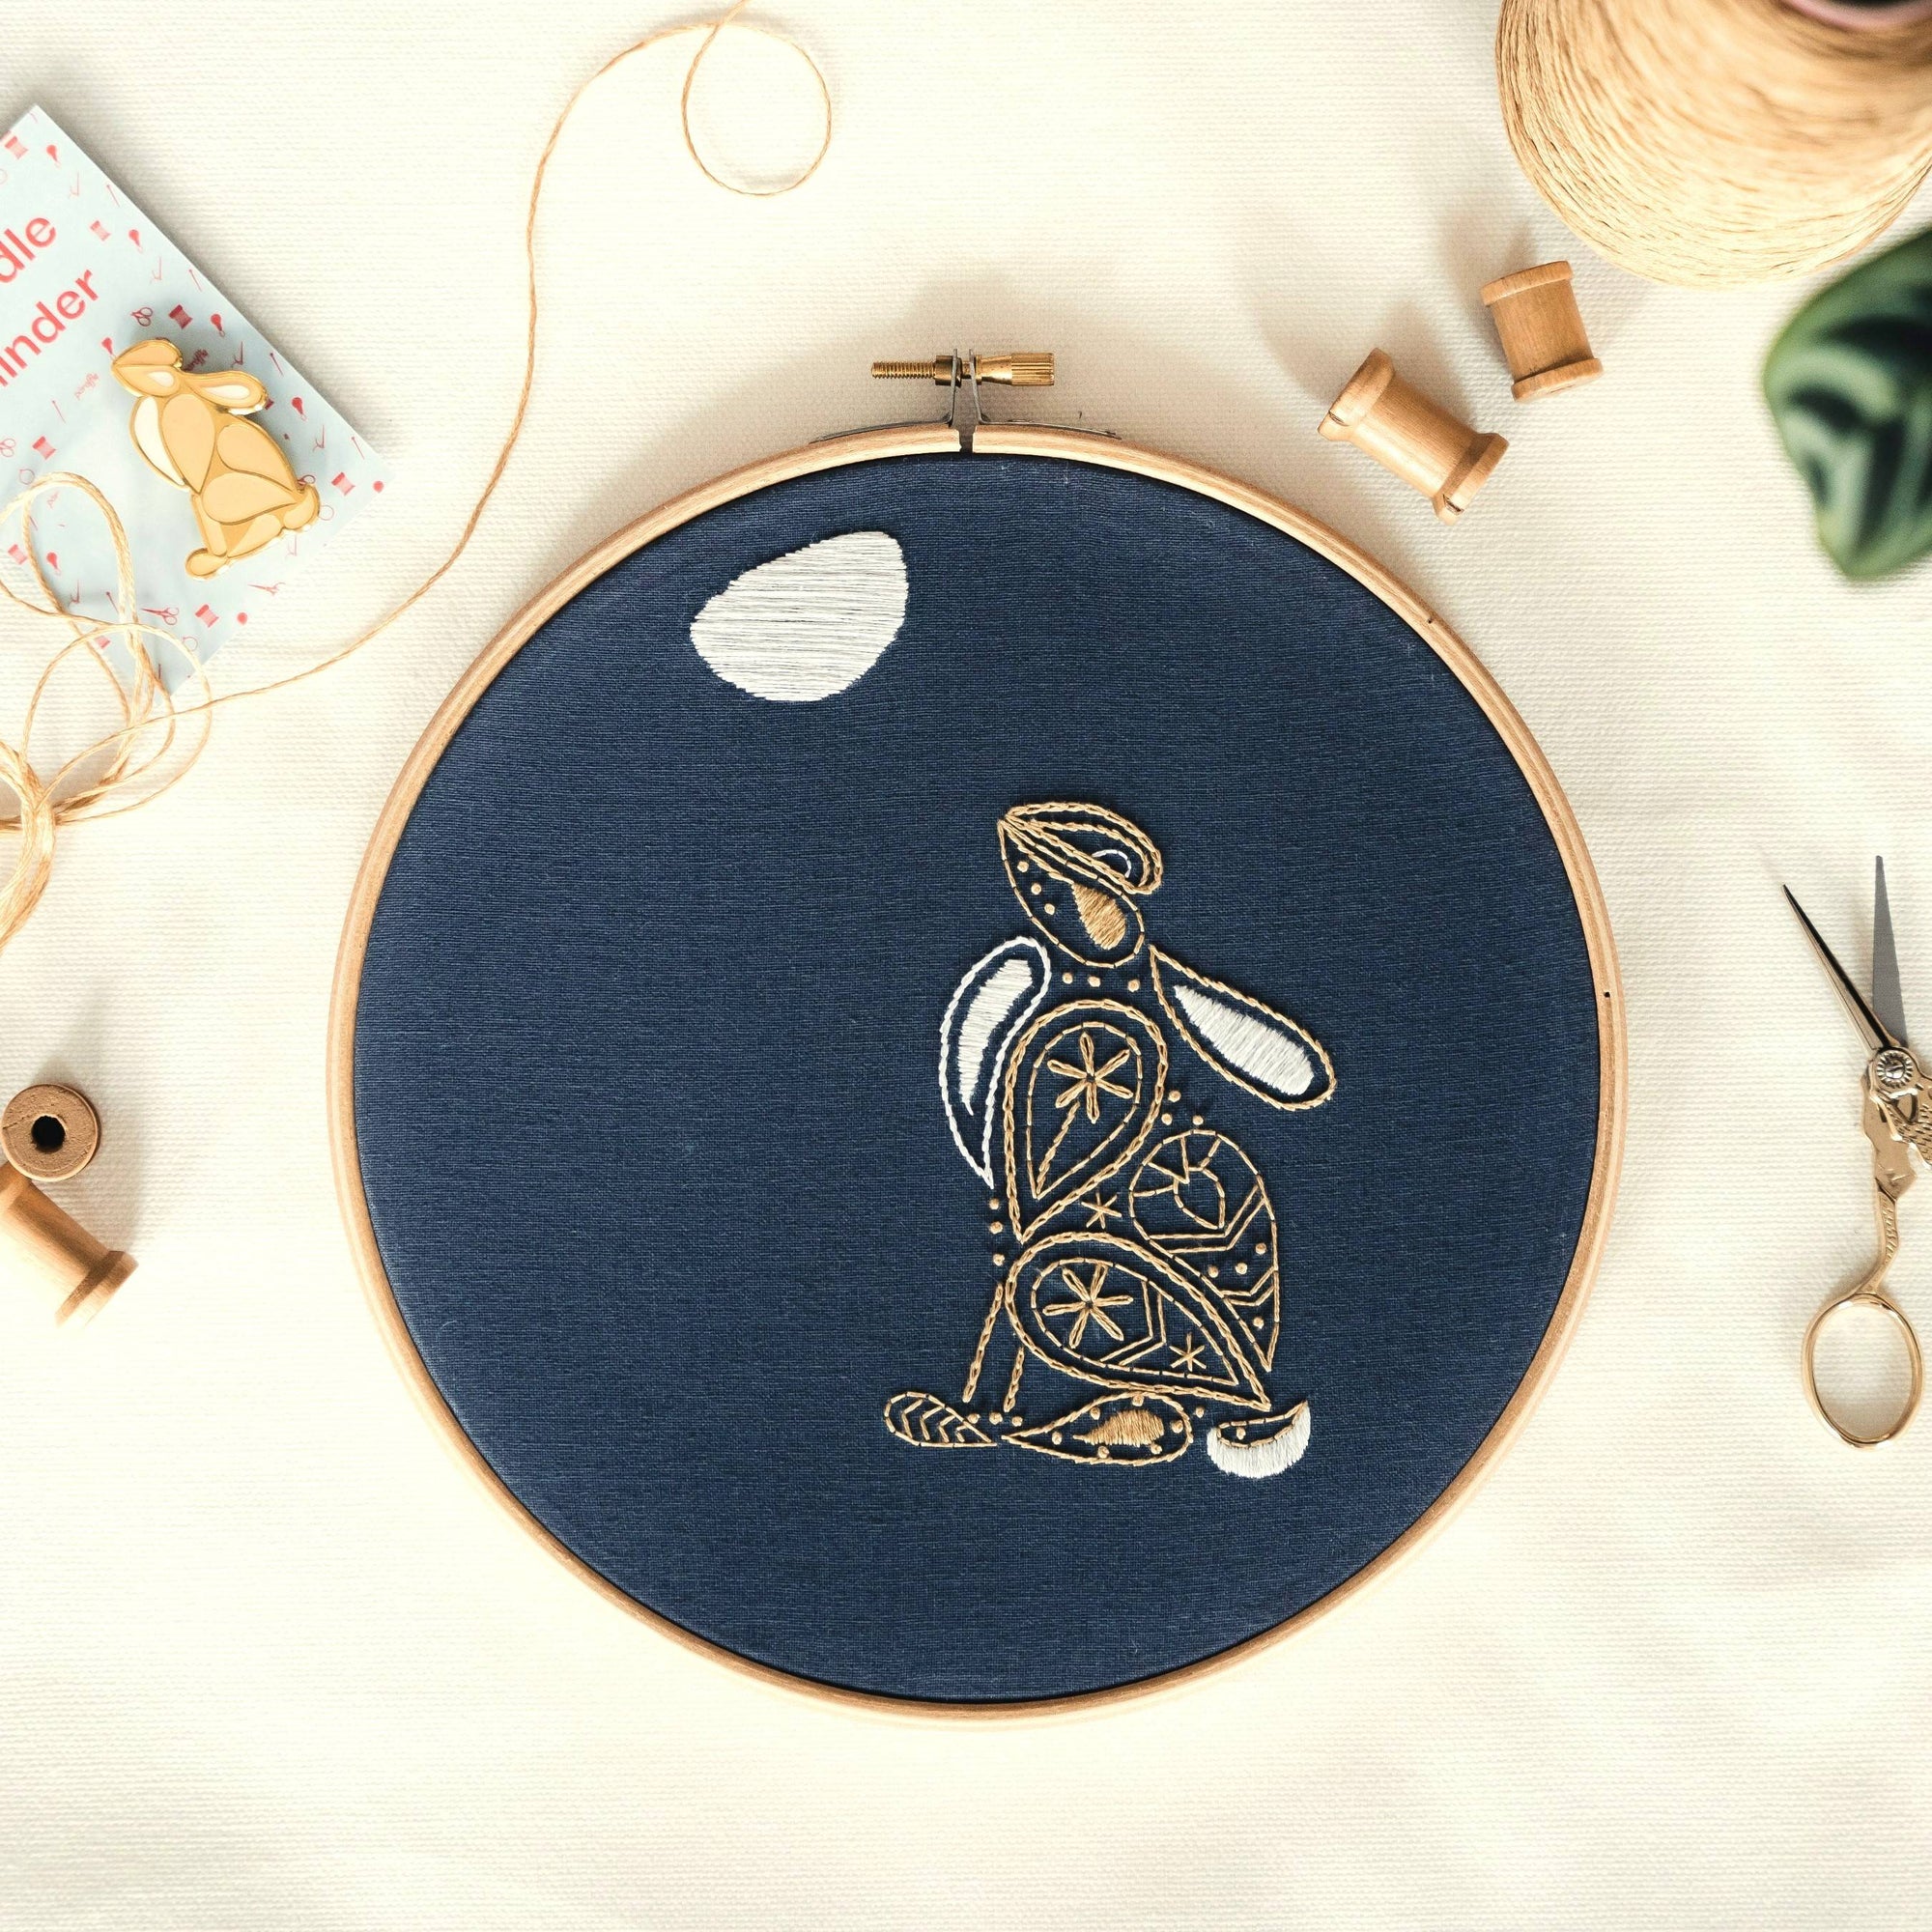 Hare embroidery design on a cream background